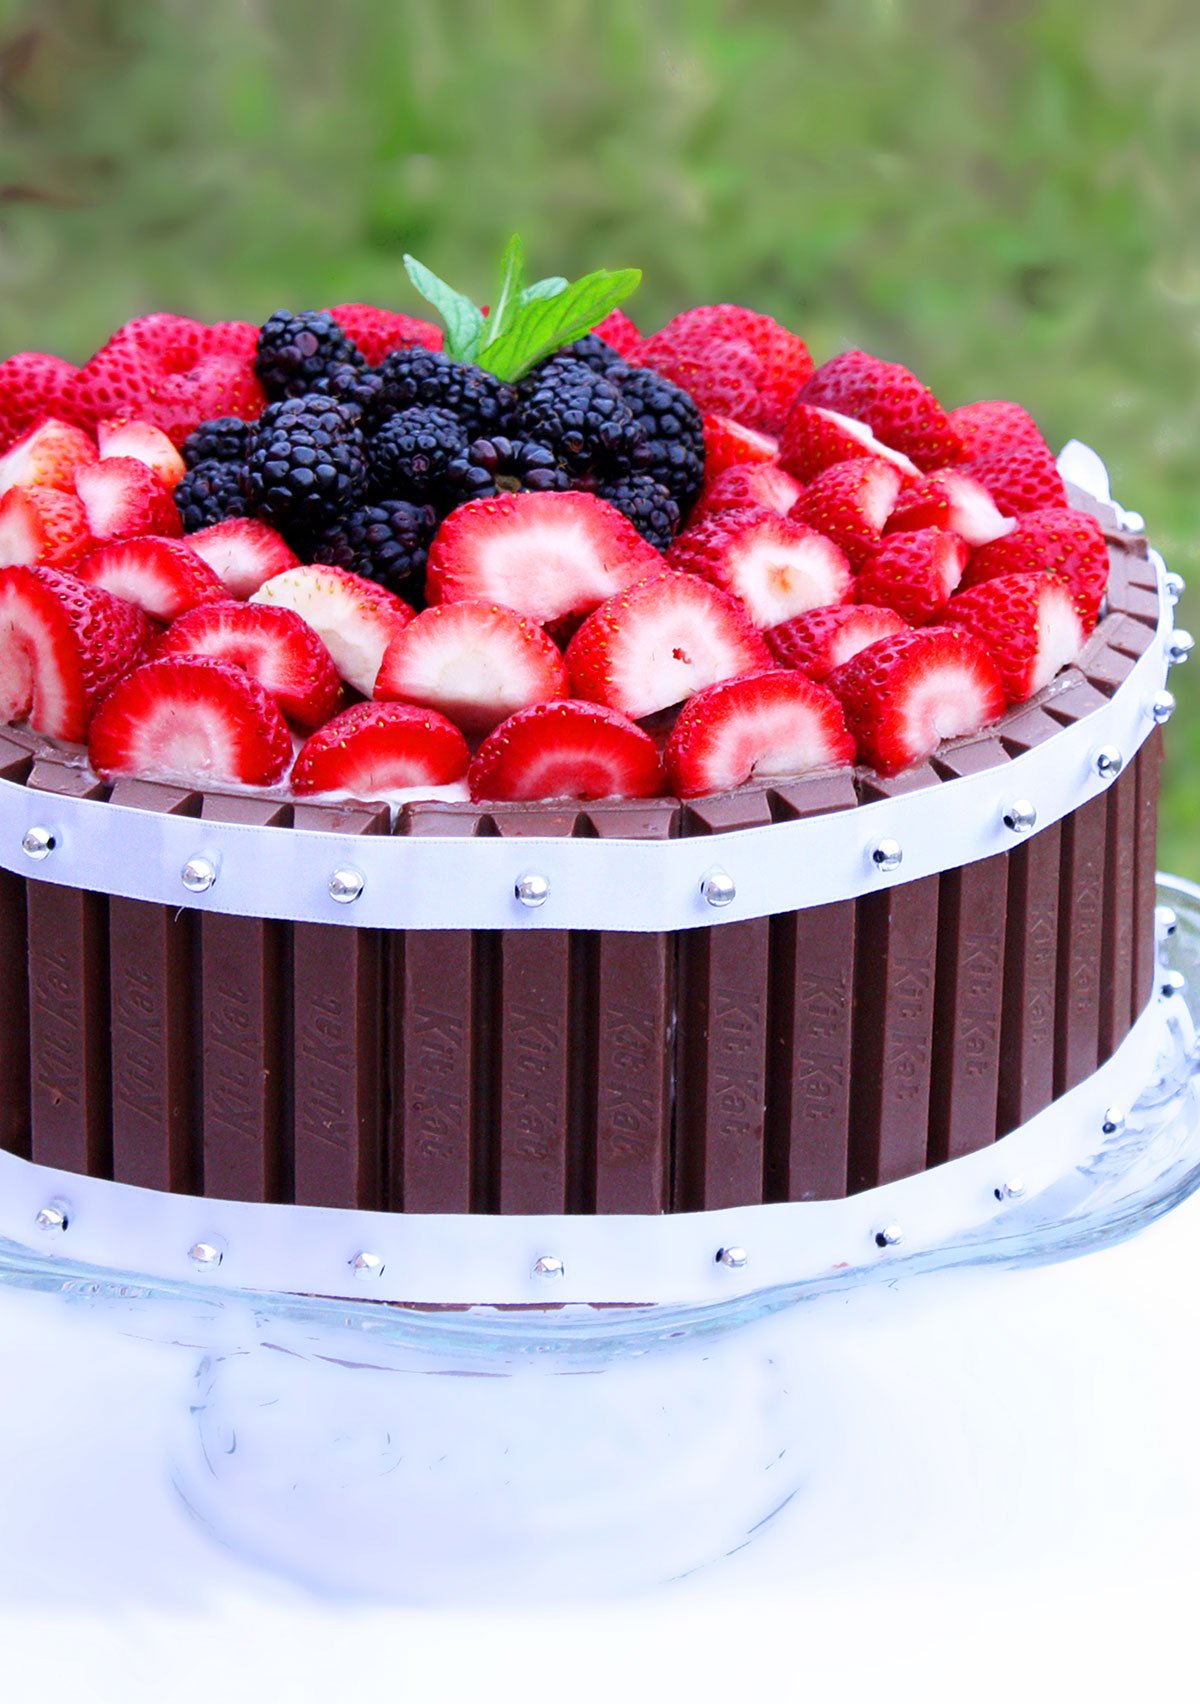 Easy Kit Kat Cake With Strawberries on Glass Cake Stand With Nature Background